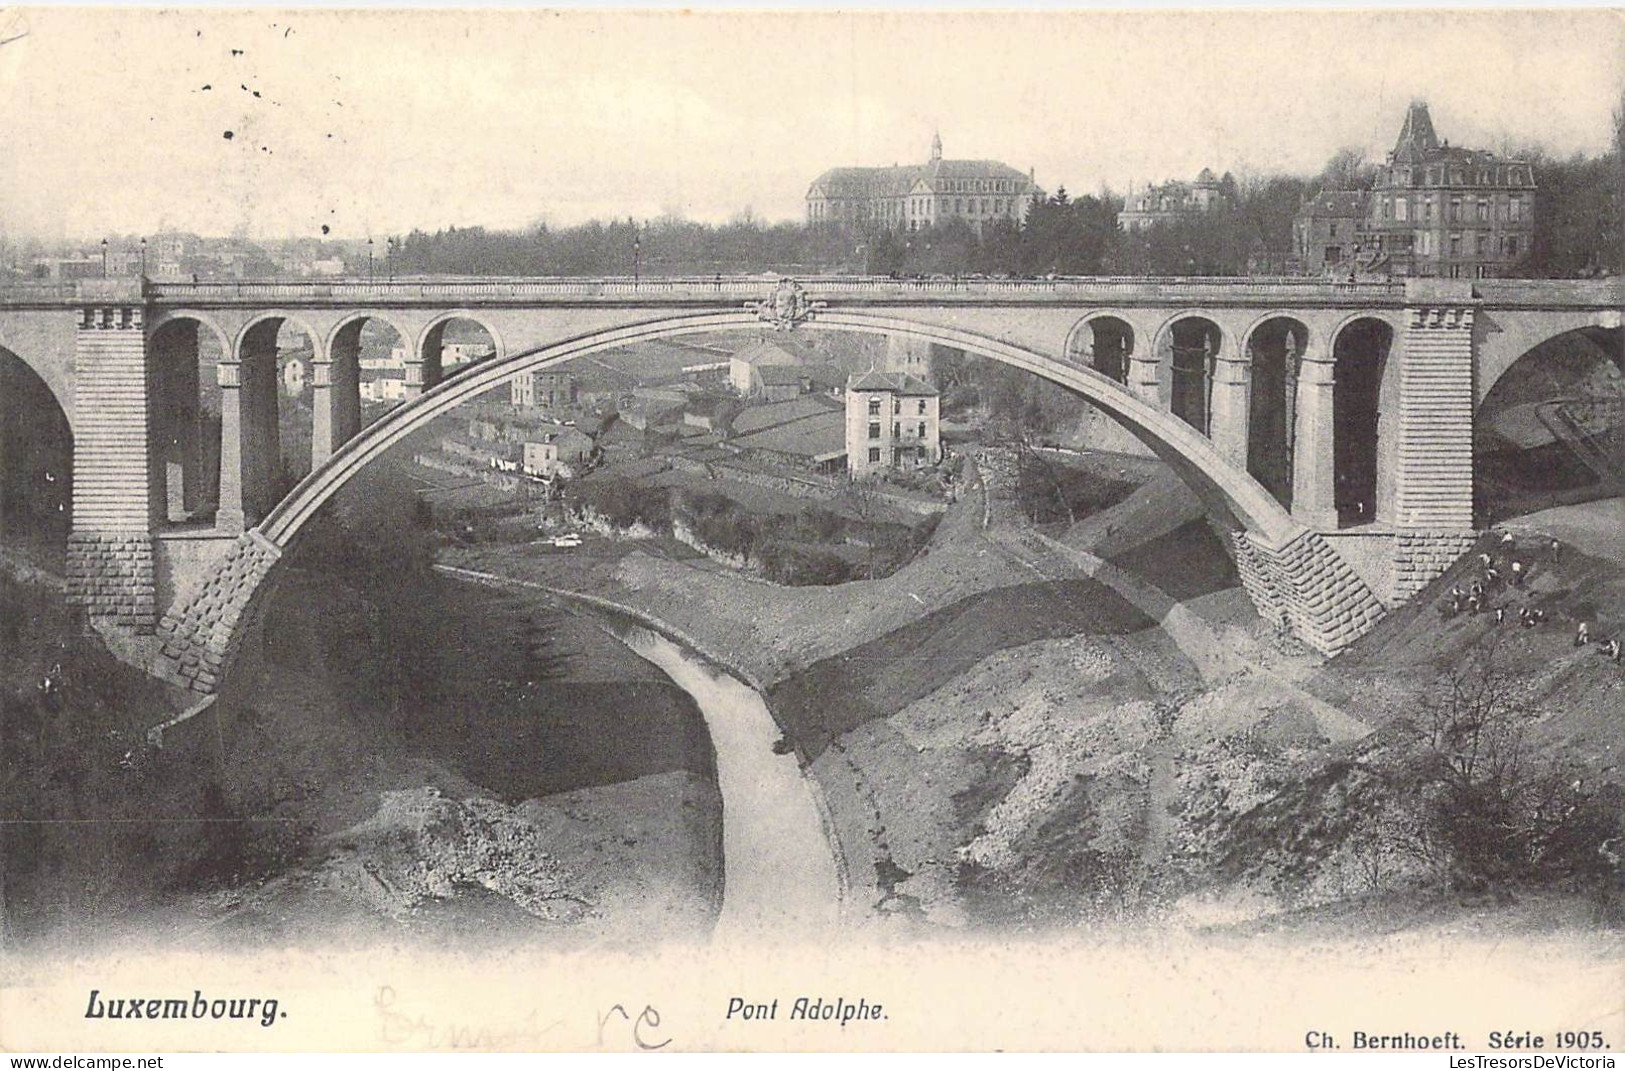 LUXEMBOURG - Pont Adolphe - Carte Postale Ancienne - Luxemburgo - Ciudad